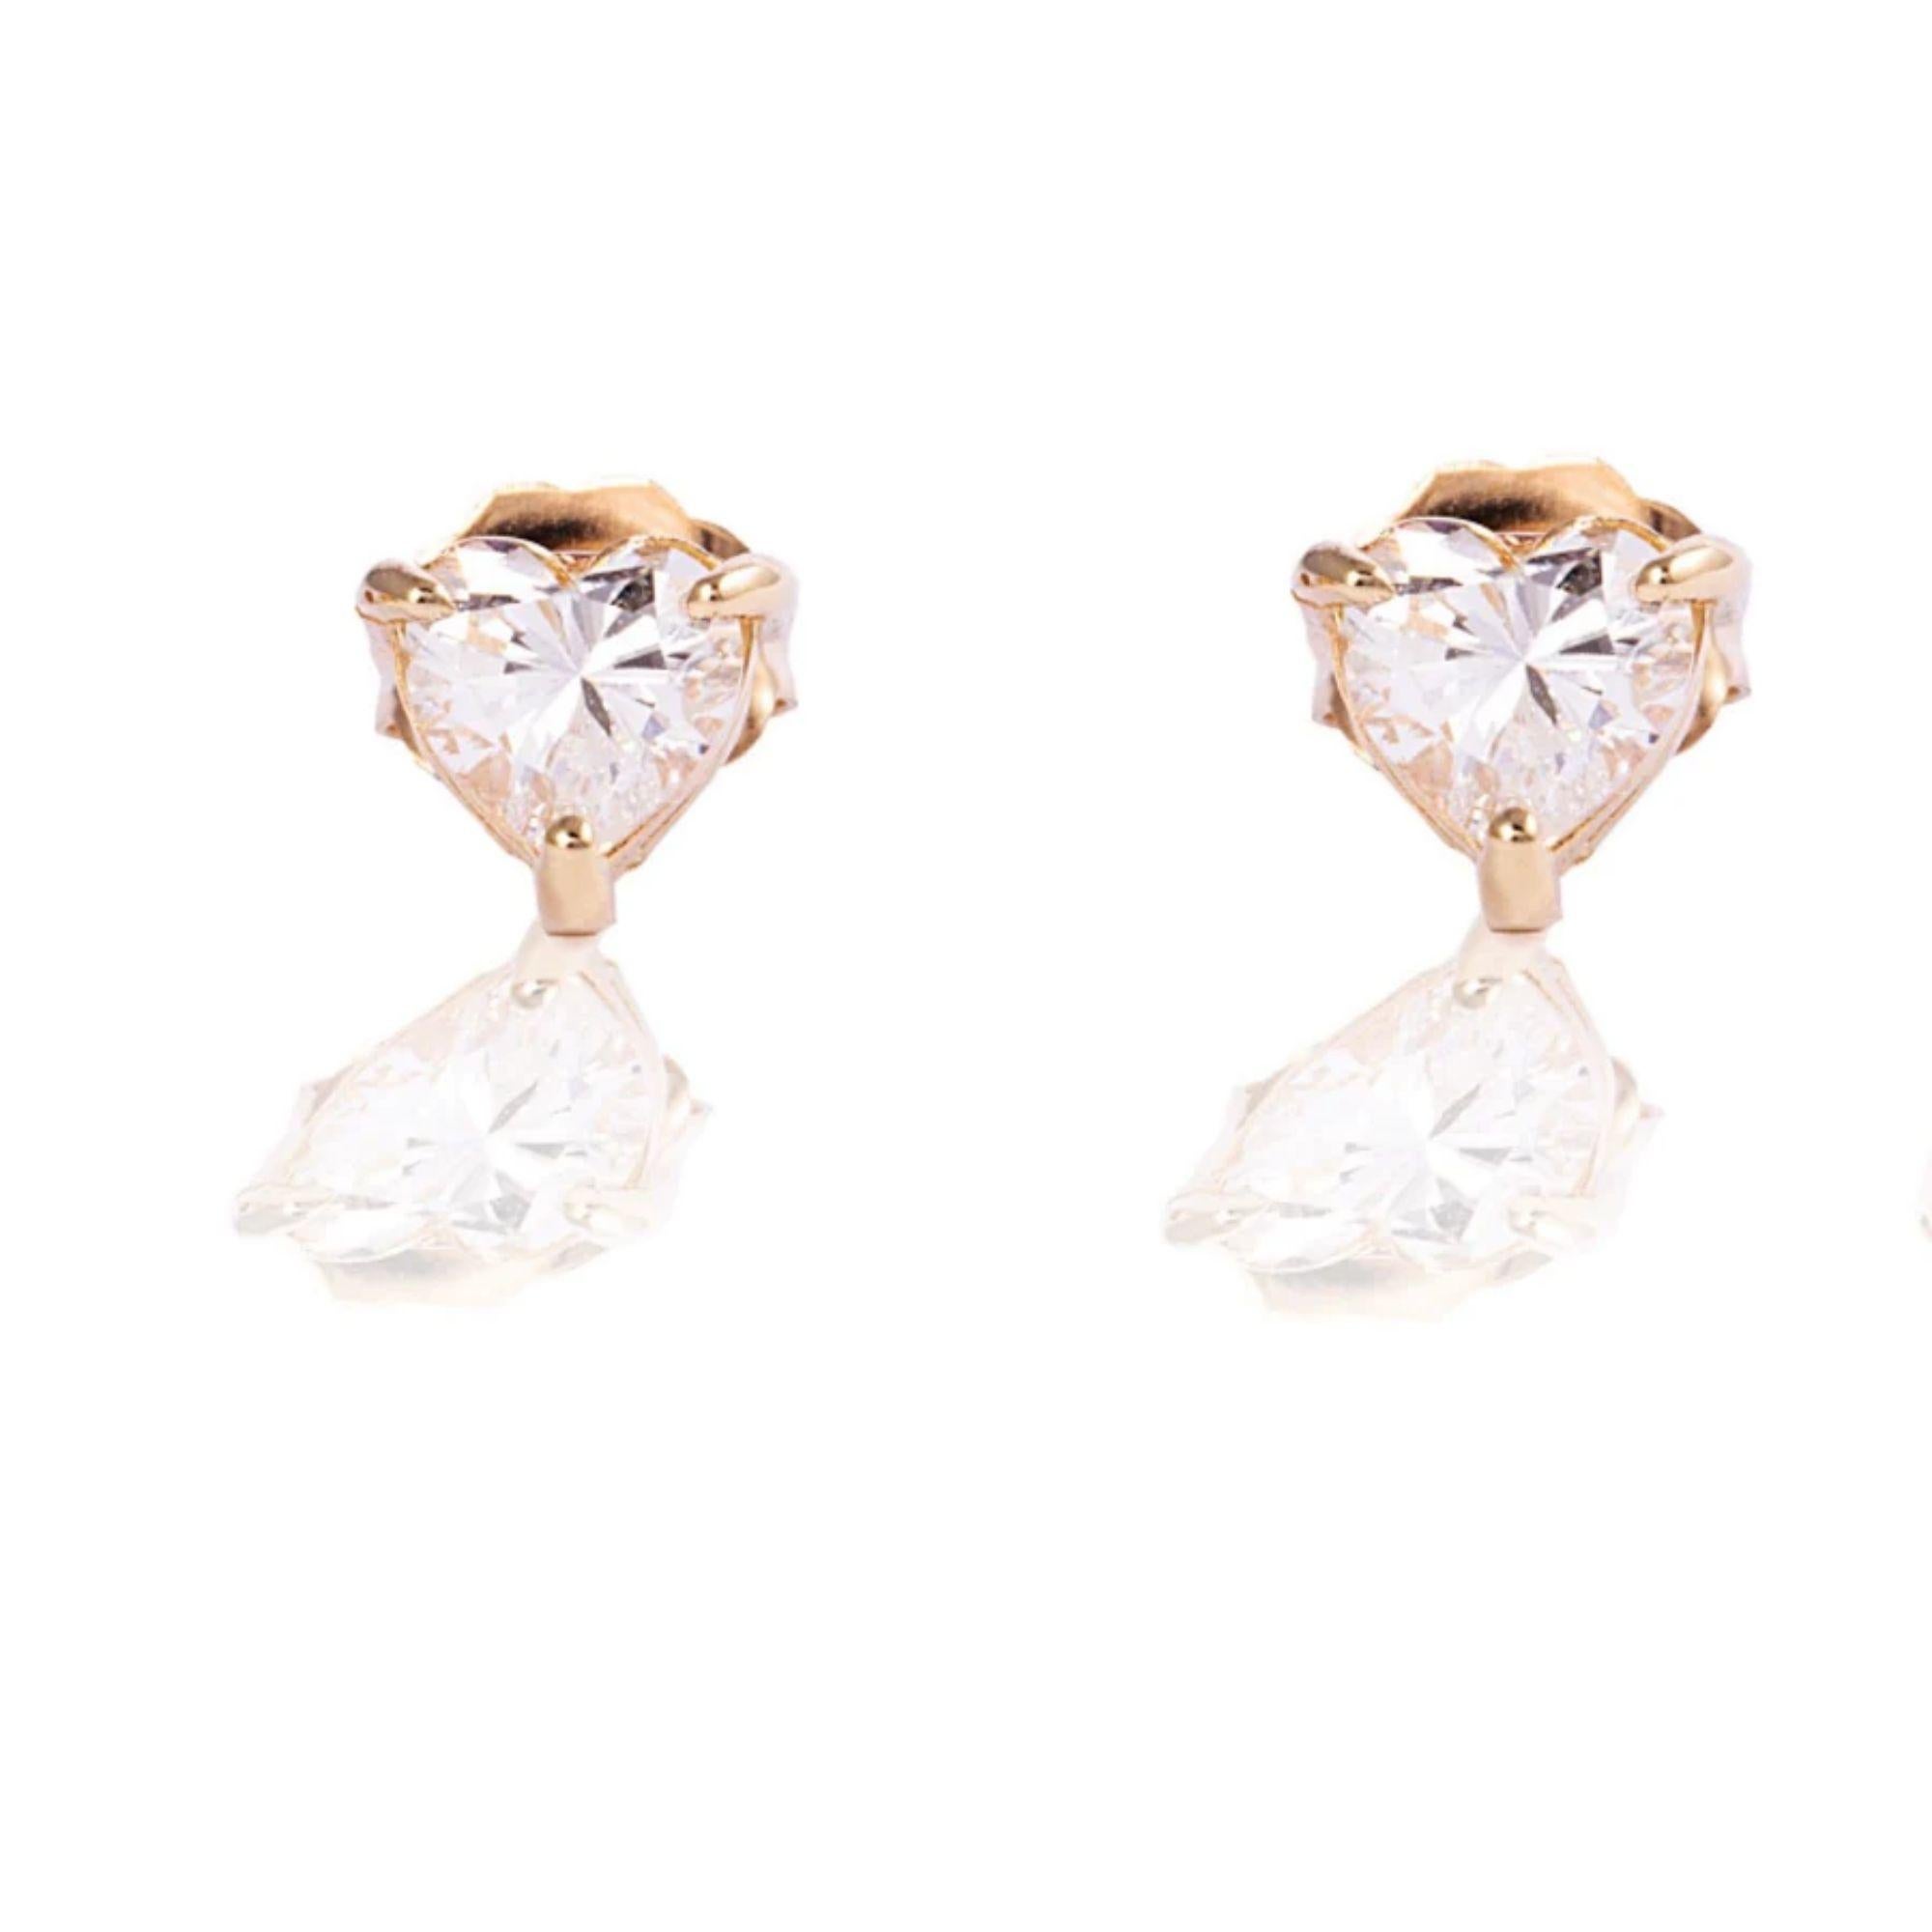 Dainty and dazzling, these unique heart shaped diamond stud earrings can’t be missed. Crafted in cool 14k yellow gold, each sparkling earring features a diamond in a prong-look setting. Radiant with .1 ct. t.w. of diamonds and a bright polished